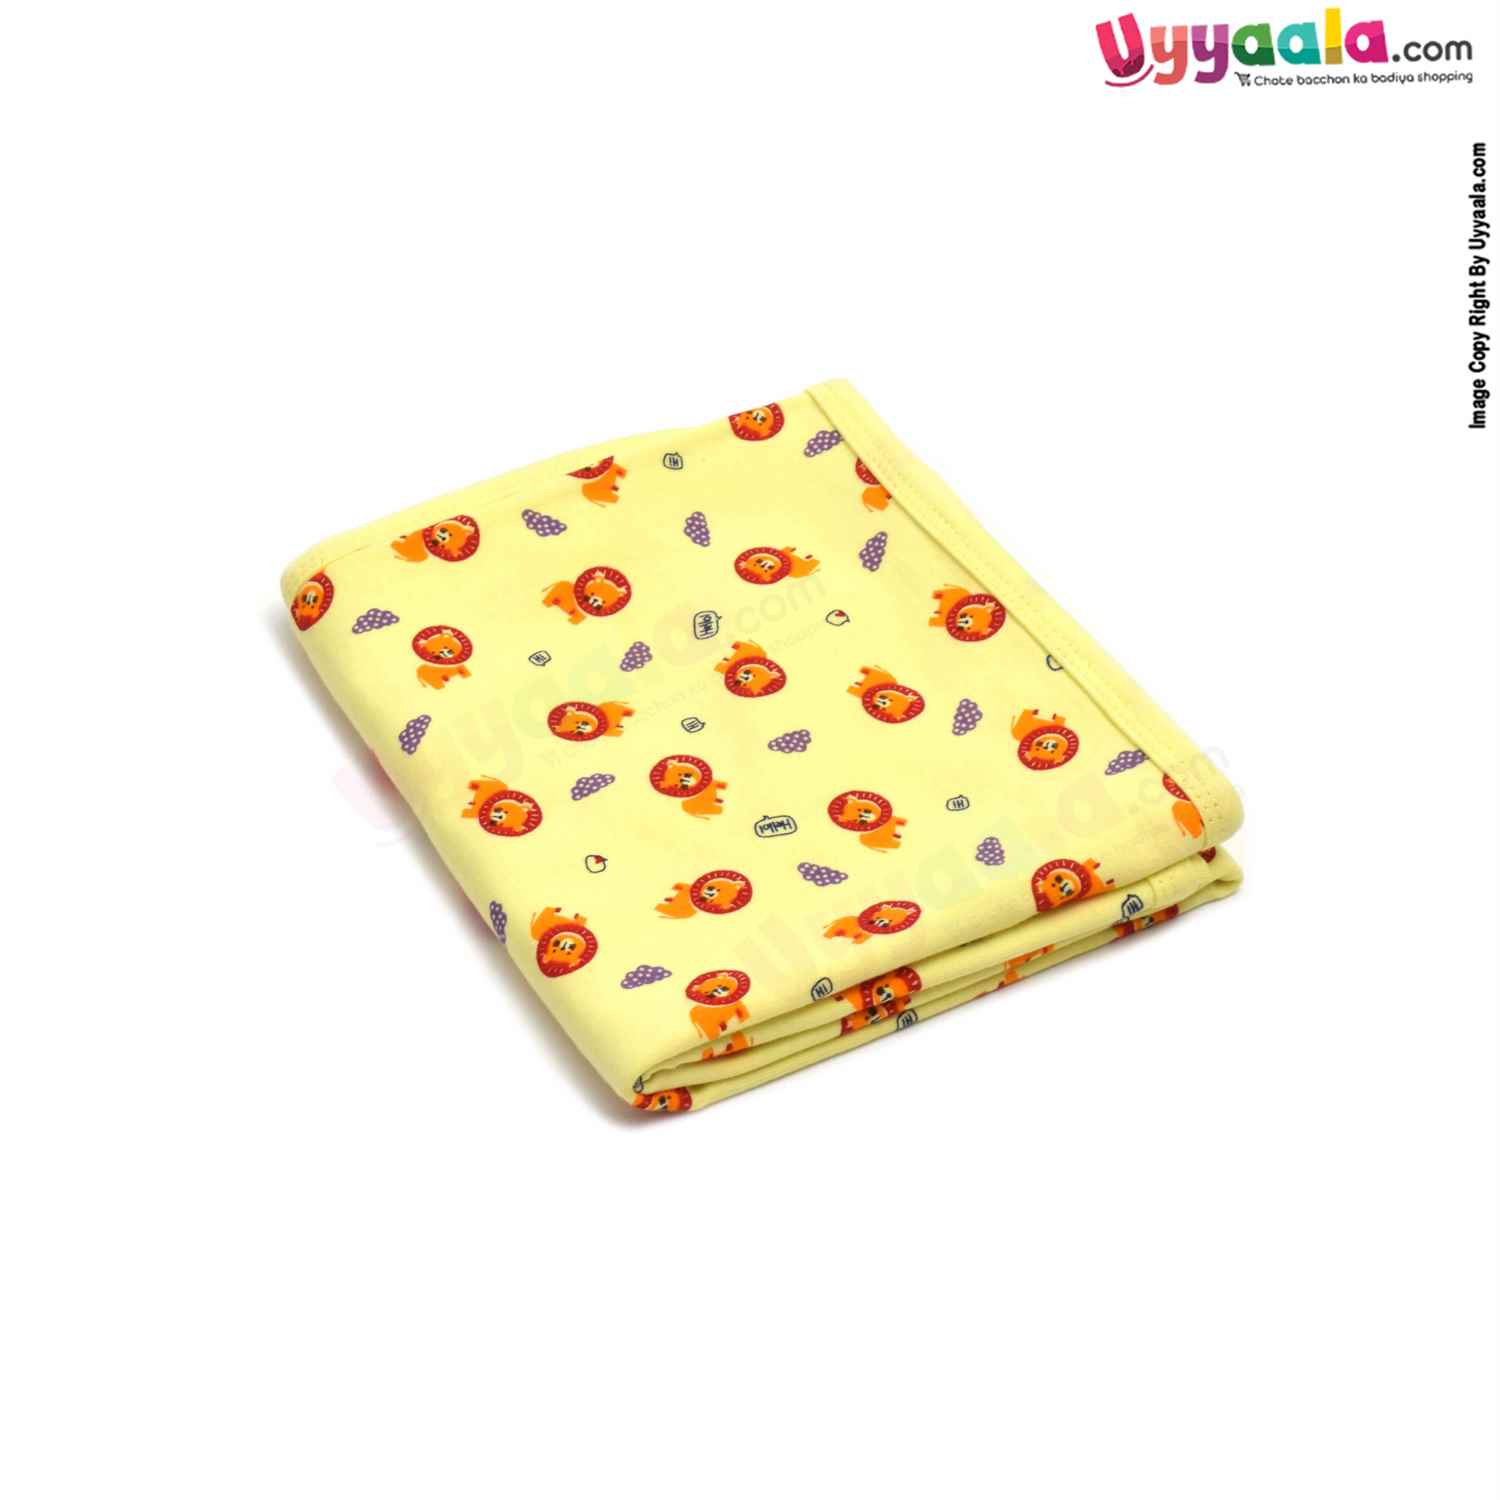 Hosiery Cotton Hooded Towel for Babies with Lion Print 0-12m Age, Size (86*72cm)- Yellow